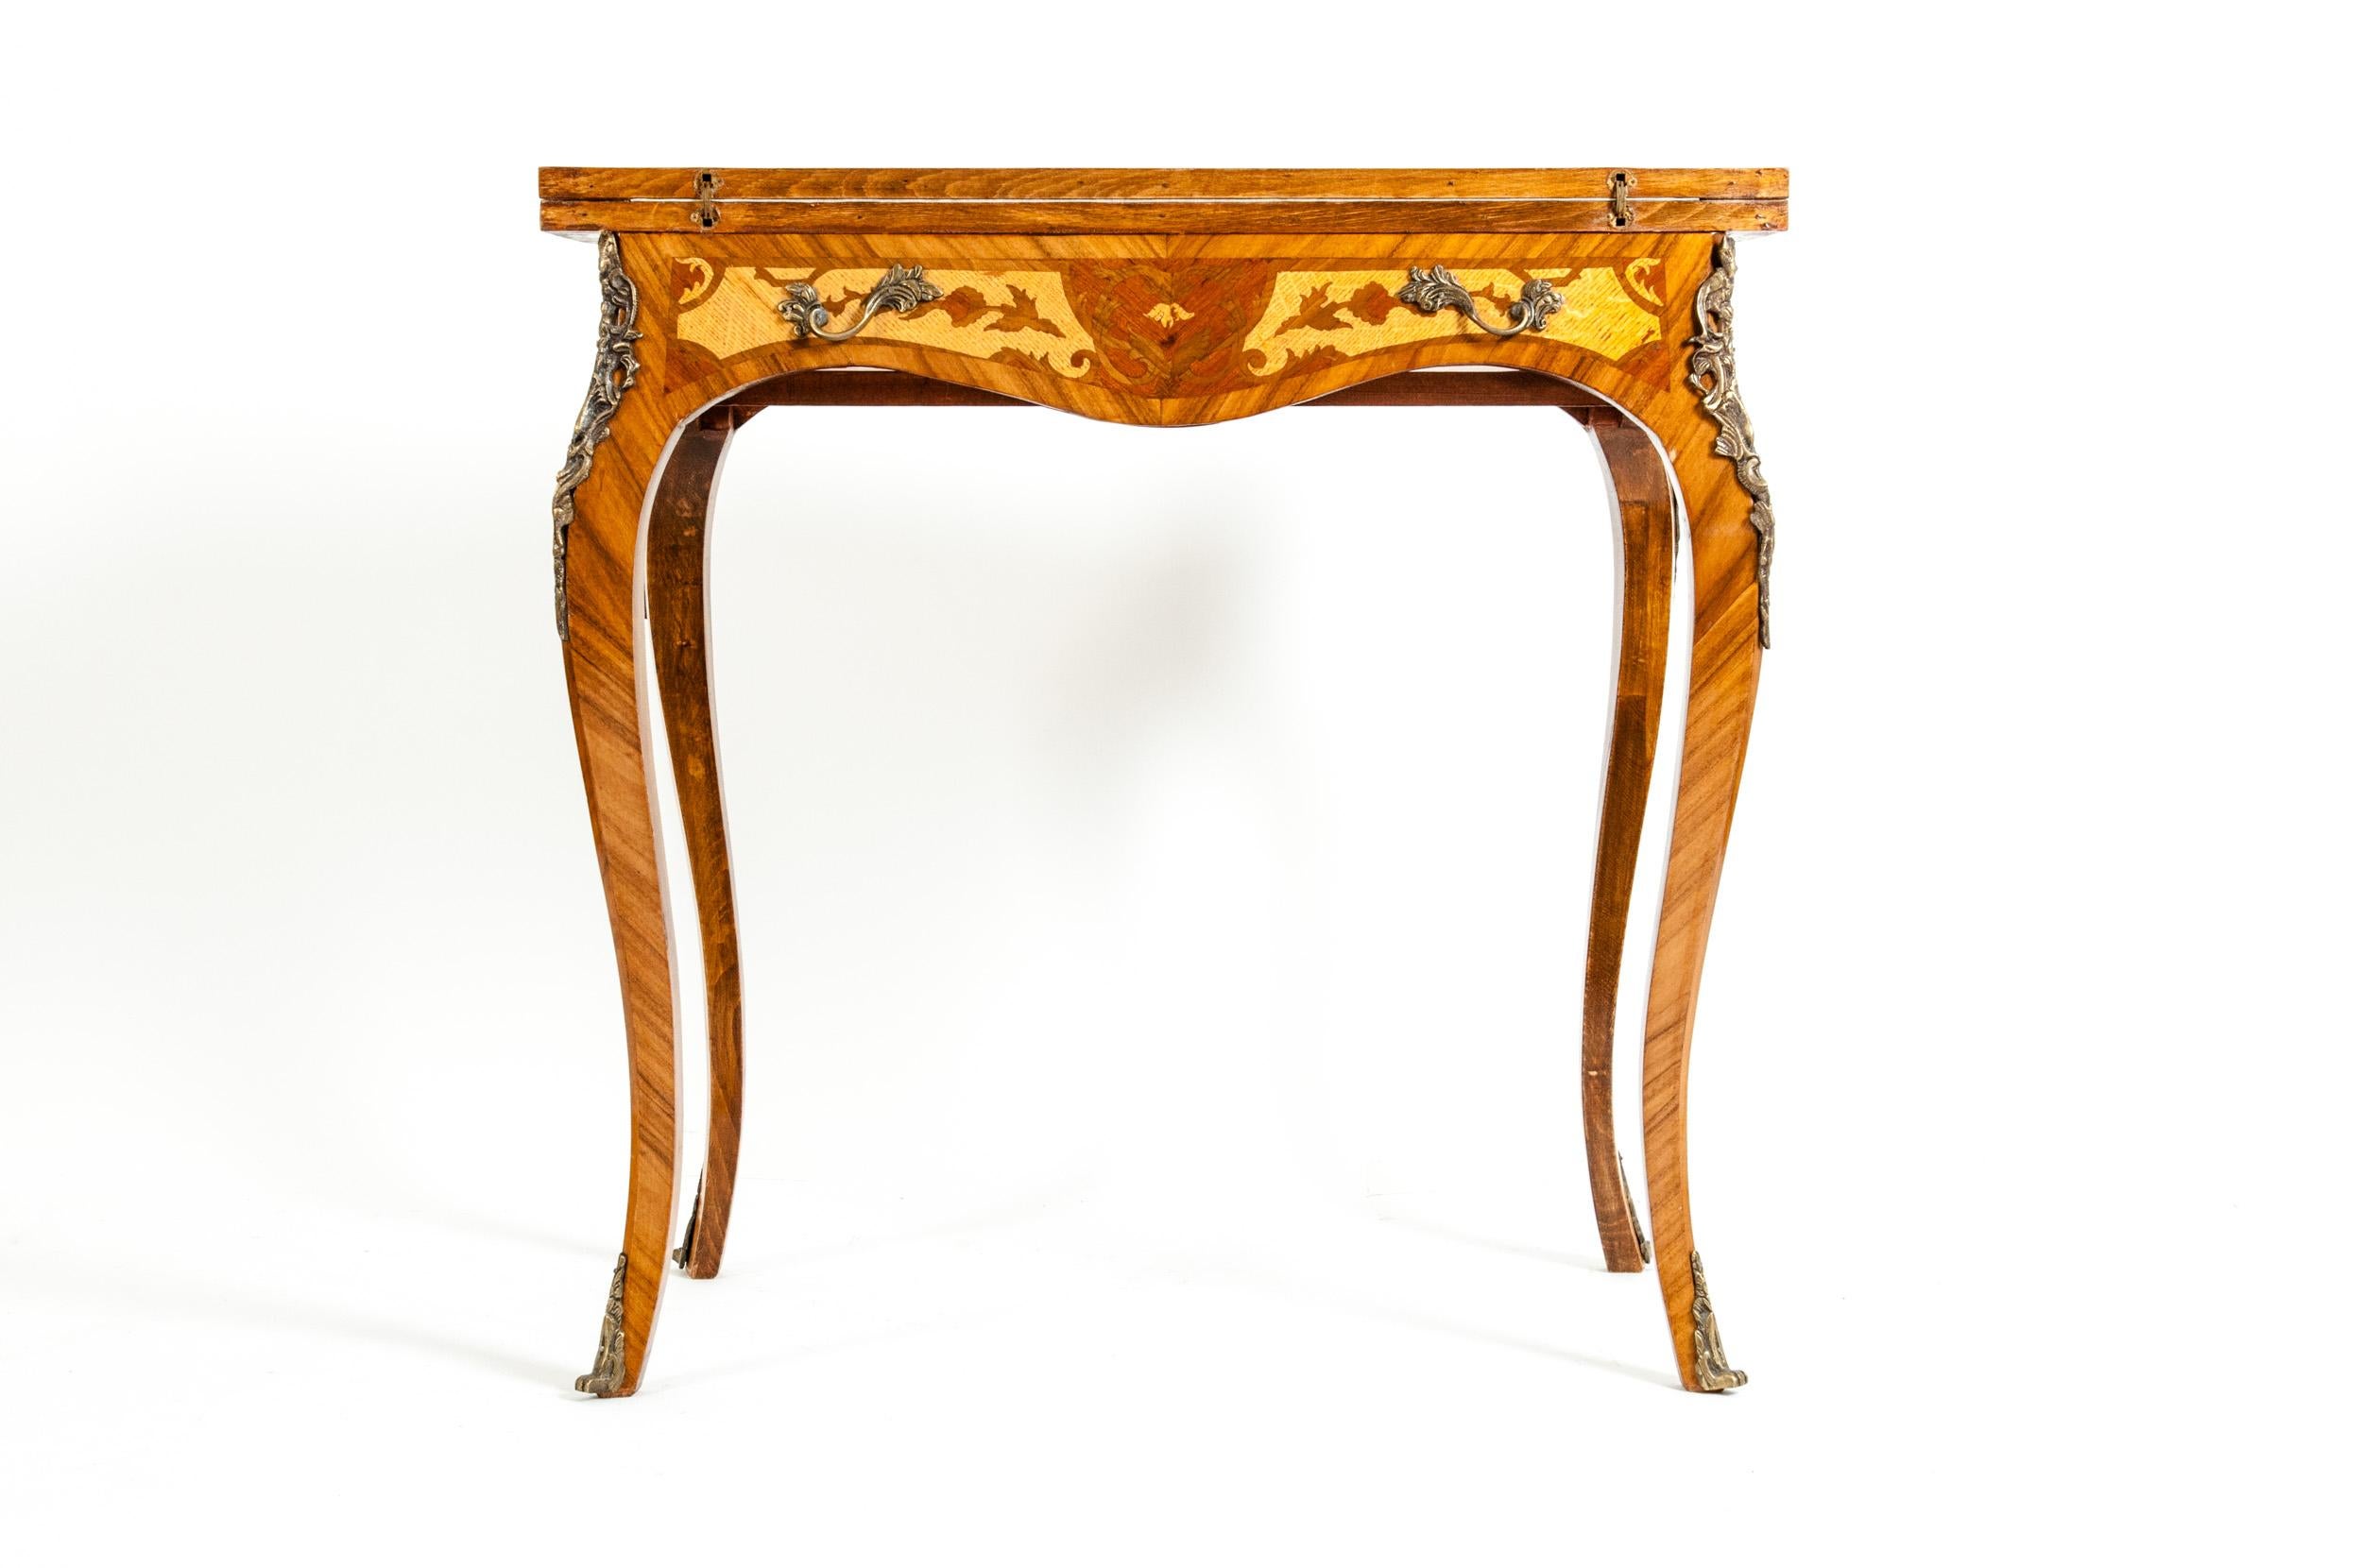 Kingwood mounted bronze design details card table with a shaped folding top above a serpentine frieze and elegant cabriole legs with gilt bronze foliate mounts, decorated overall with superb marquetry panels of cross-grained foliate scrolls against